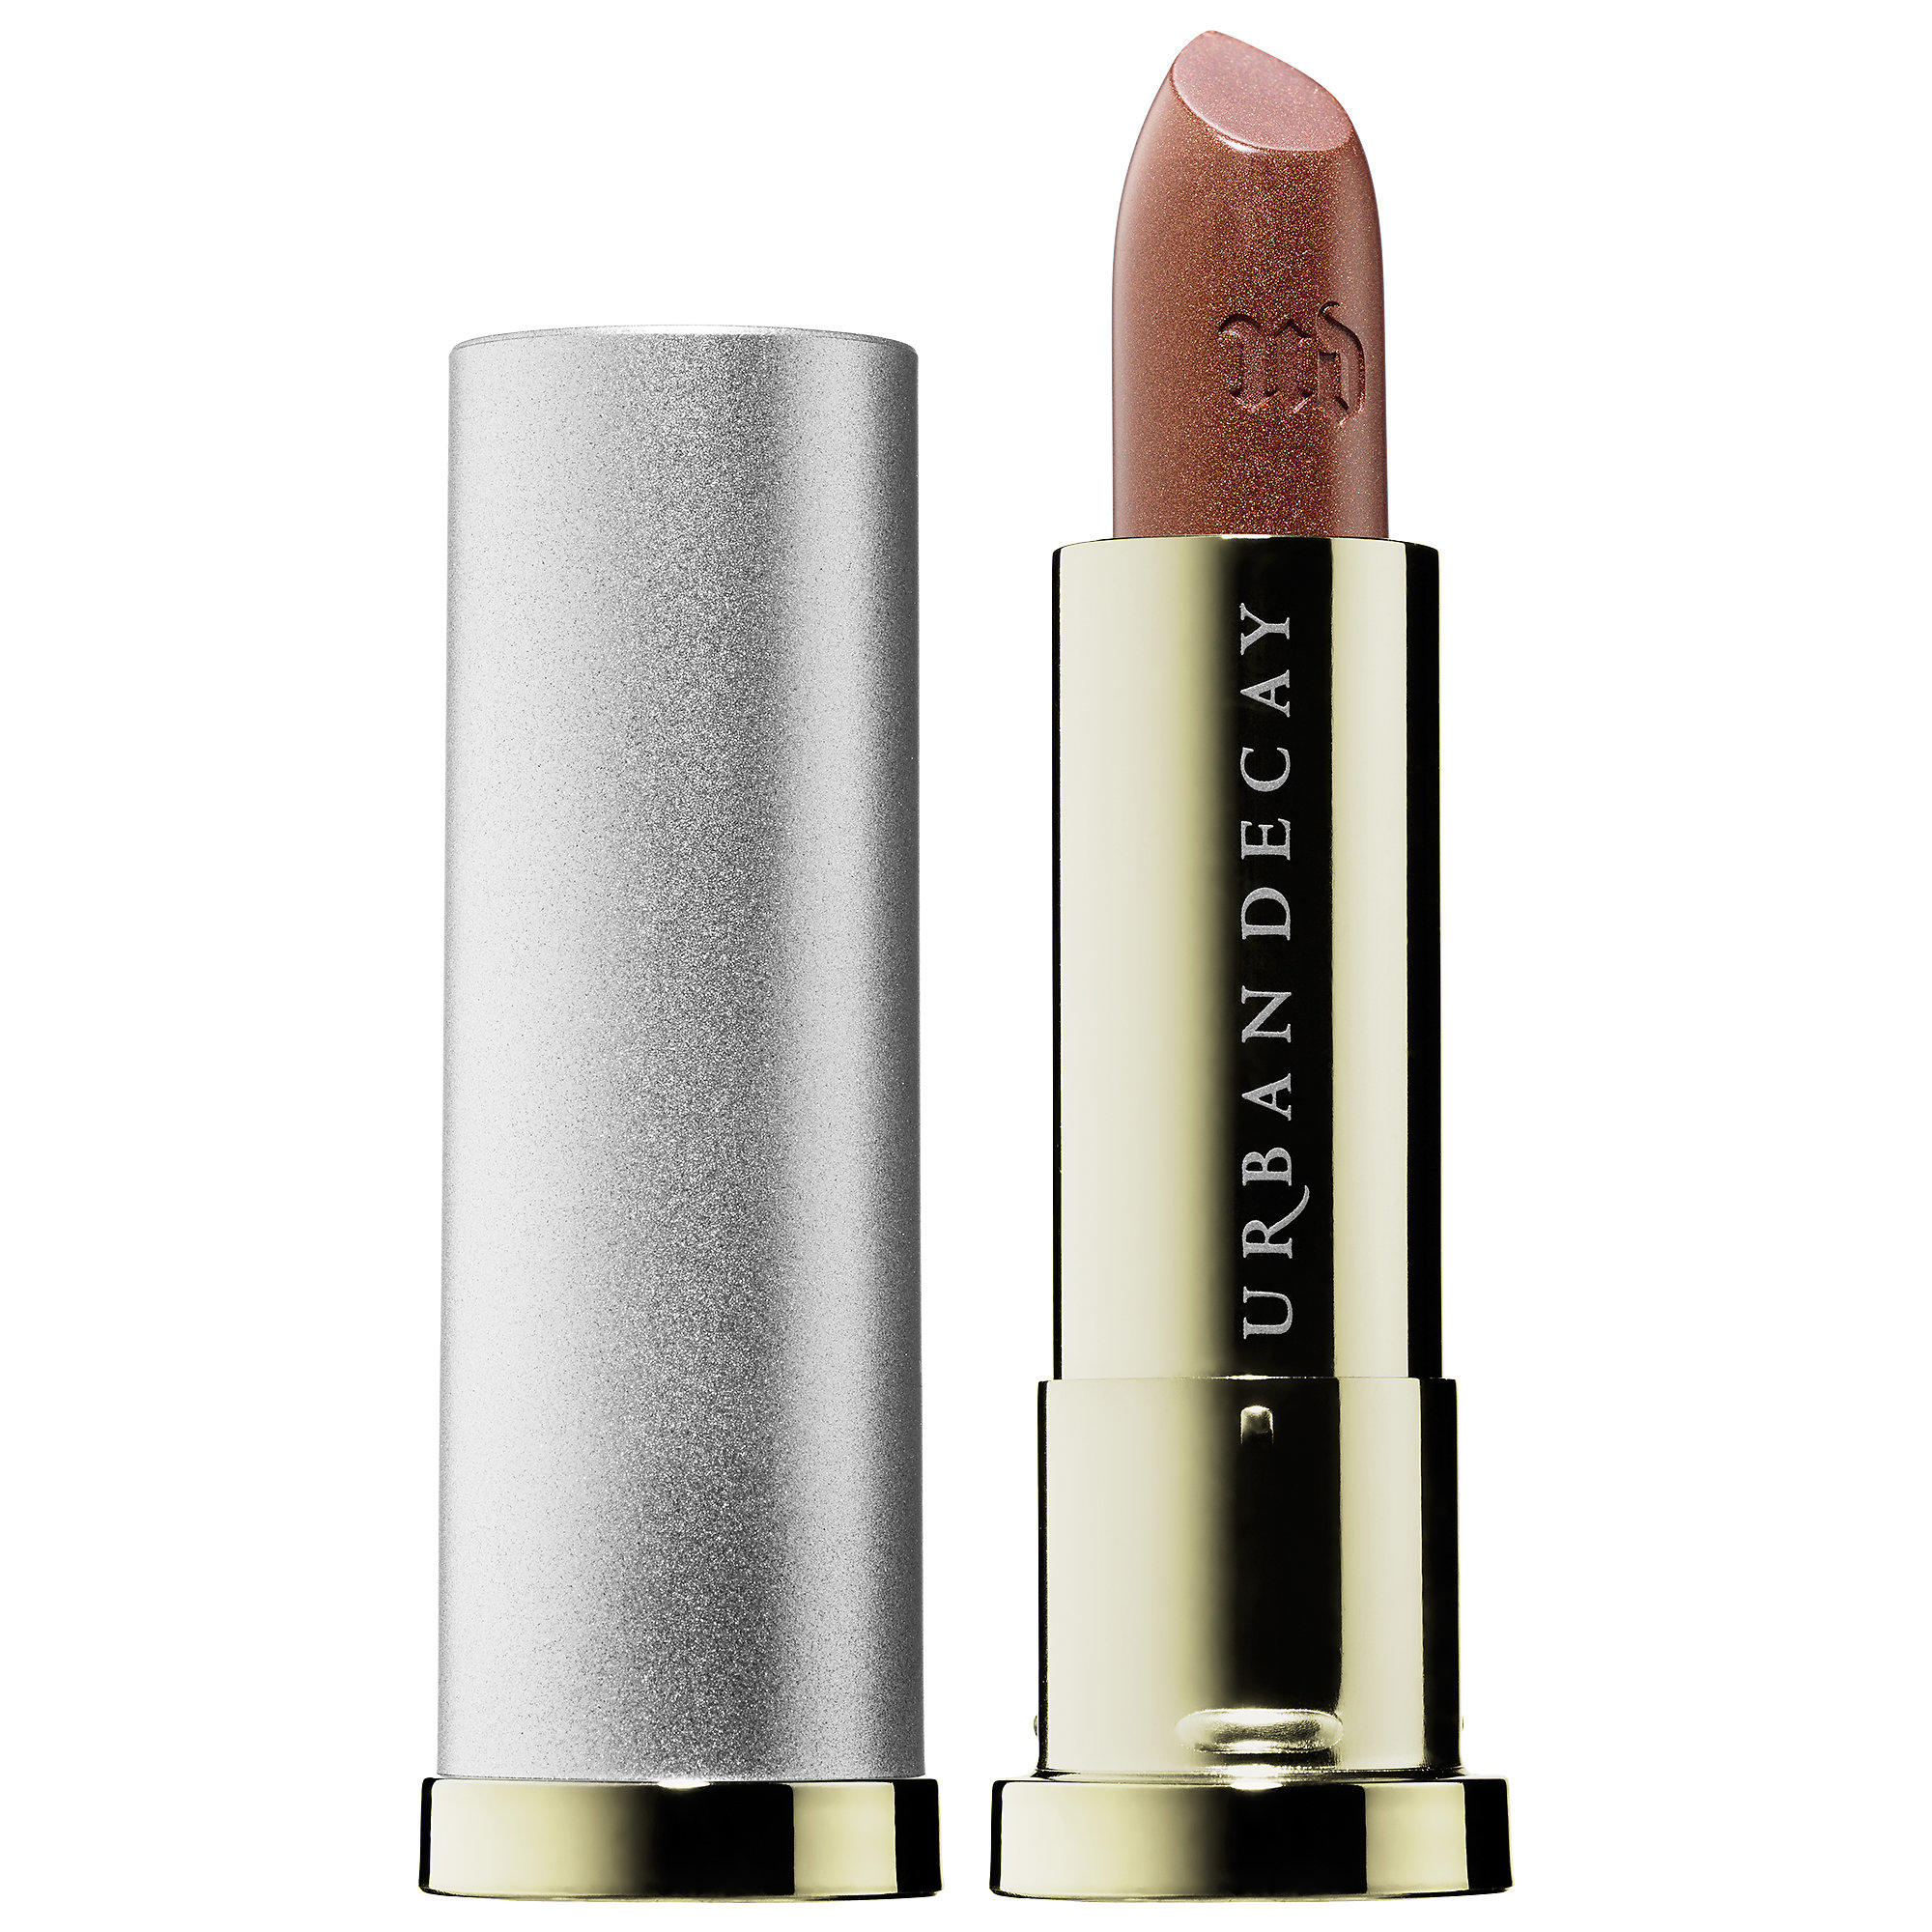 Urban Decay Vice Lipstick Roach Vintage Capsule Collection.